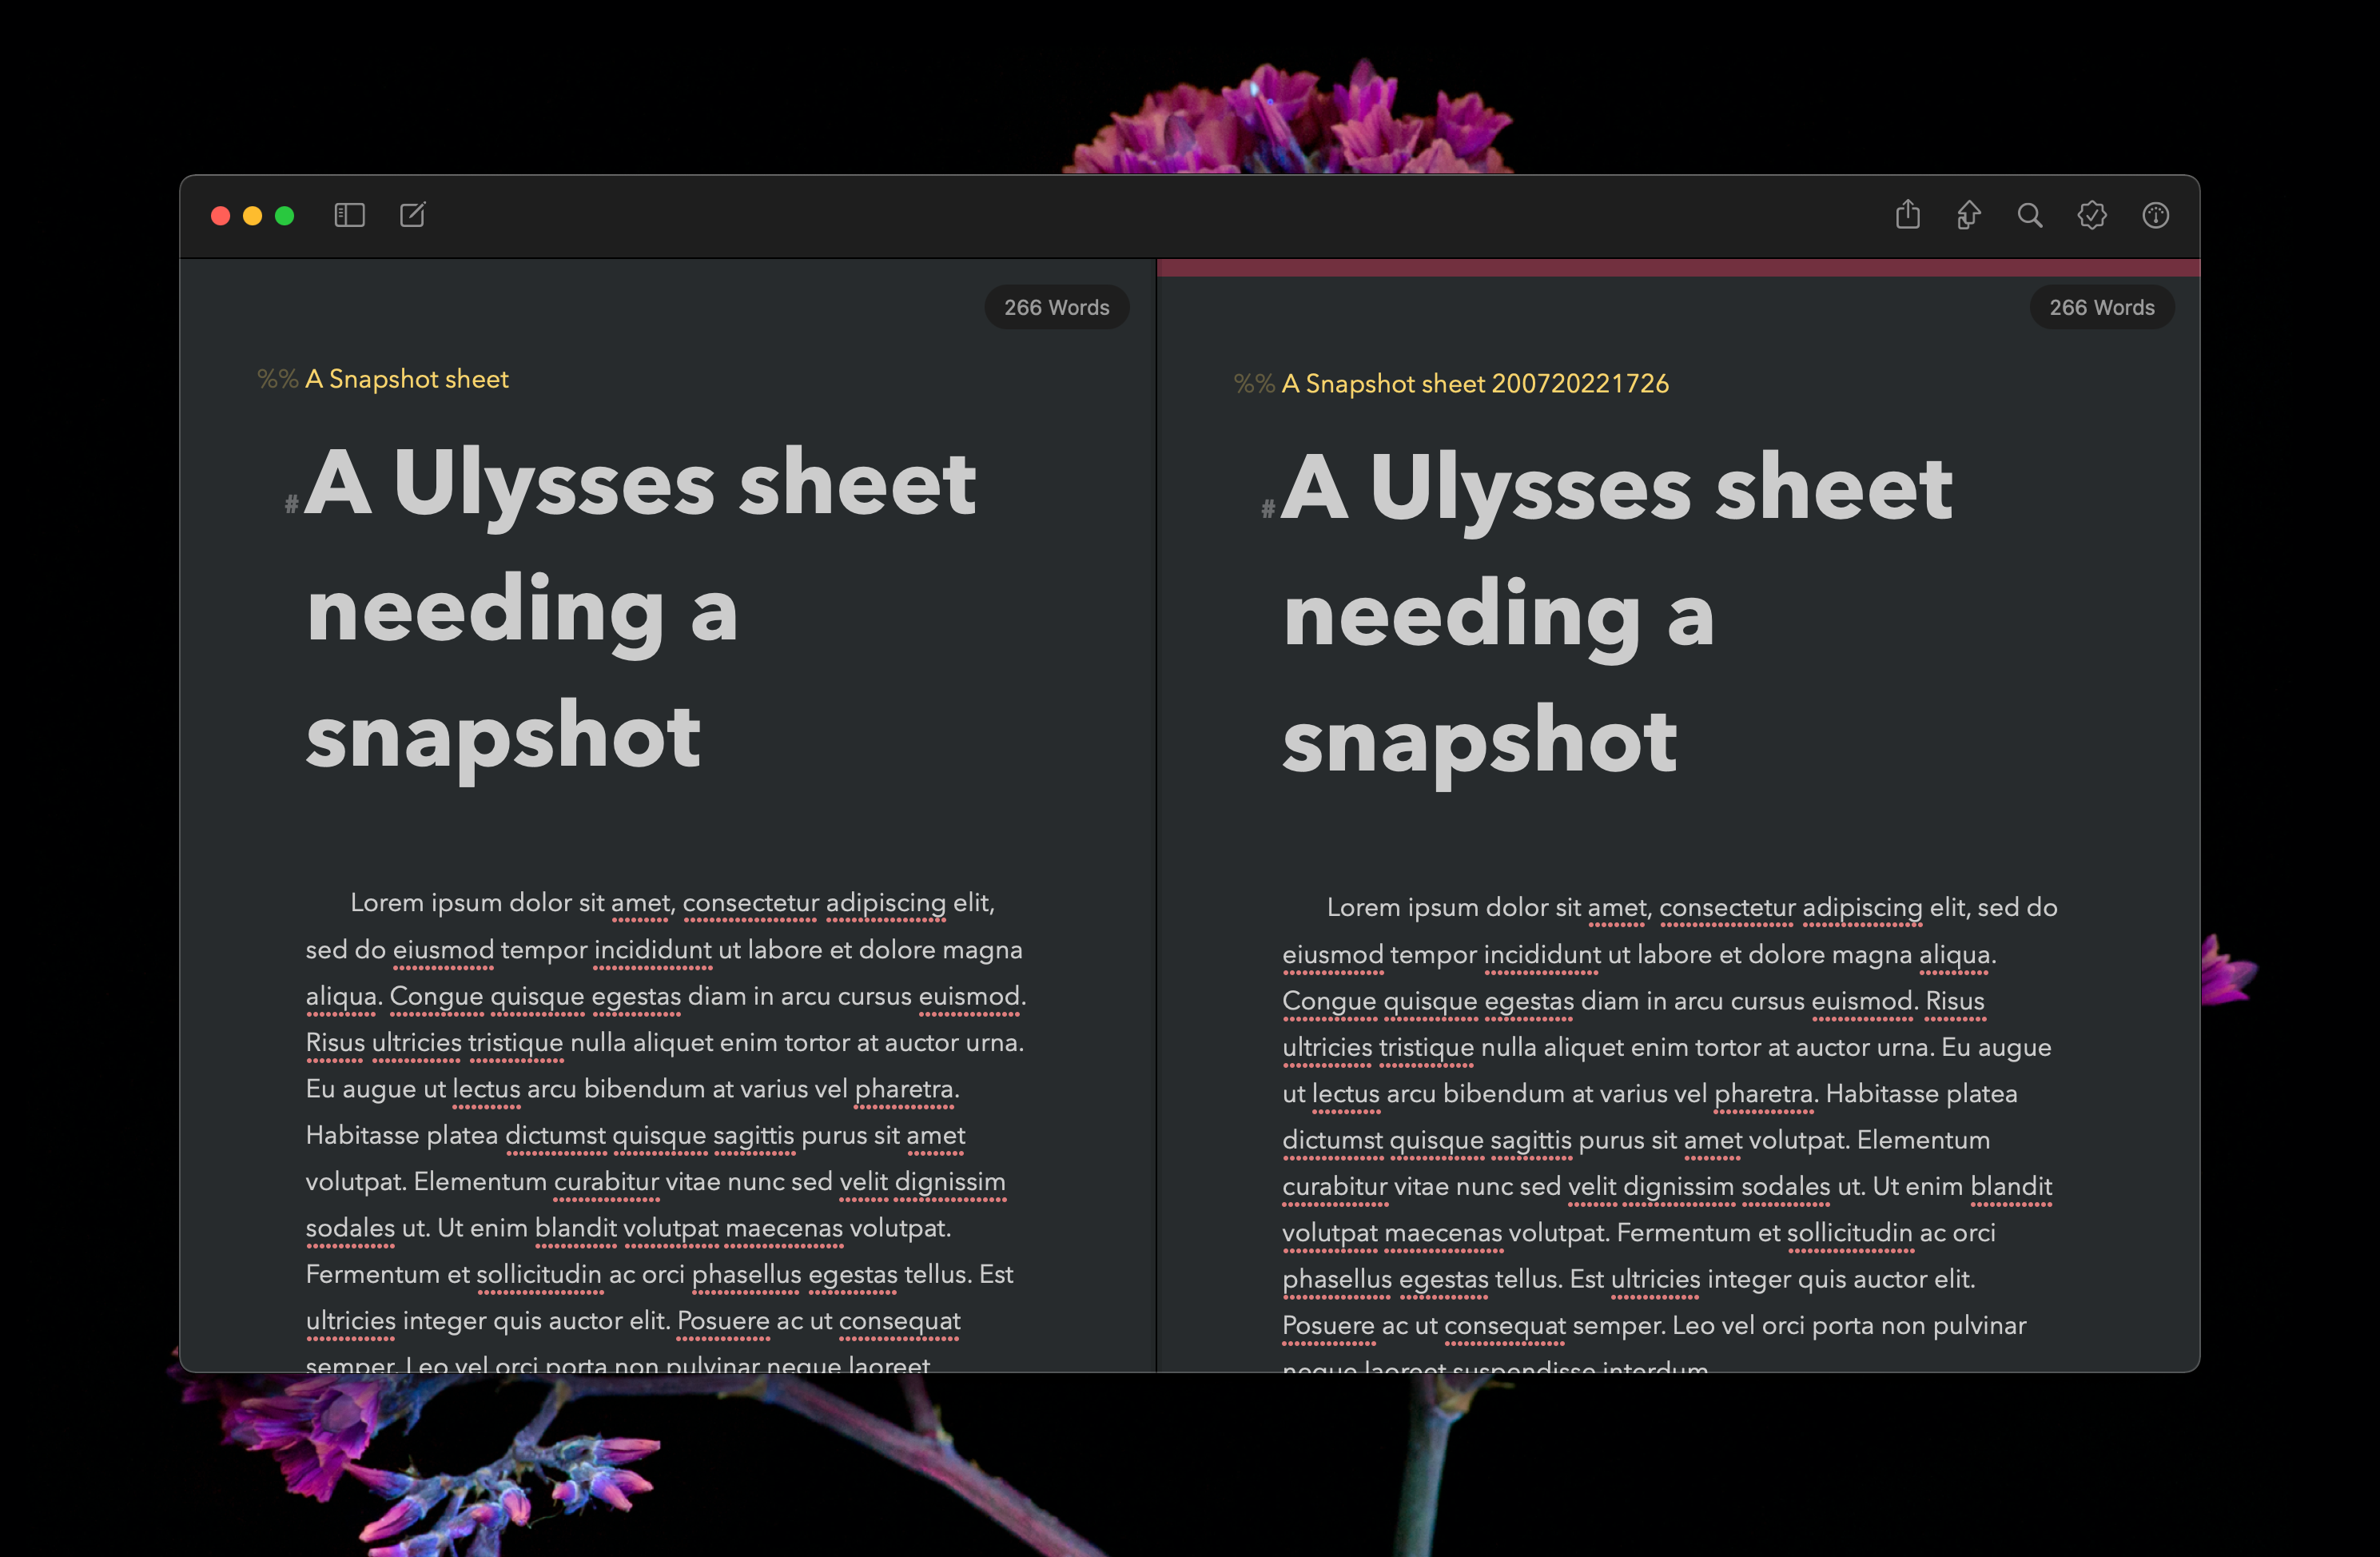 The Snapshot sheet open in the Second Editor in Ulysses